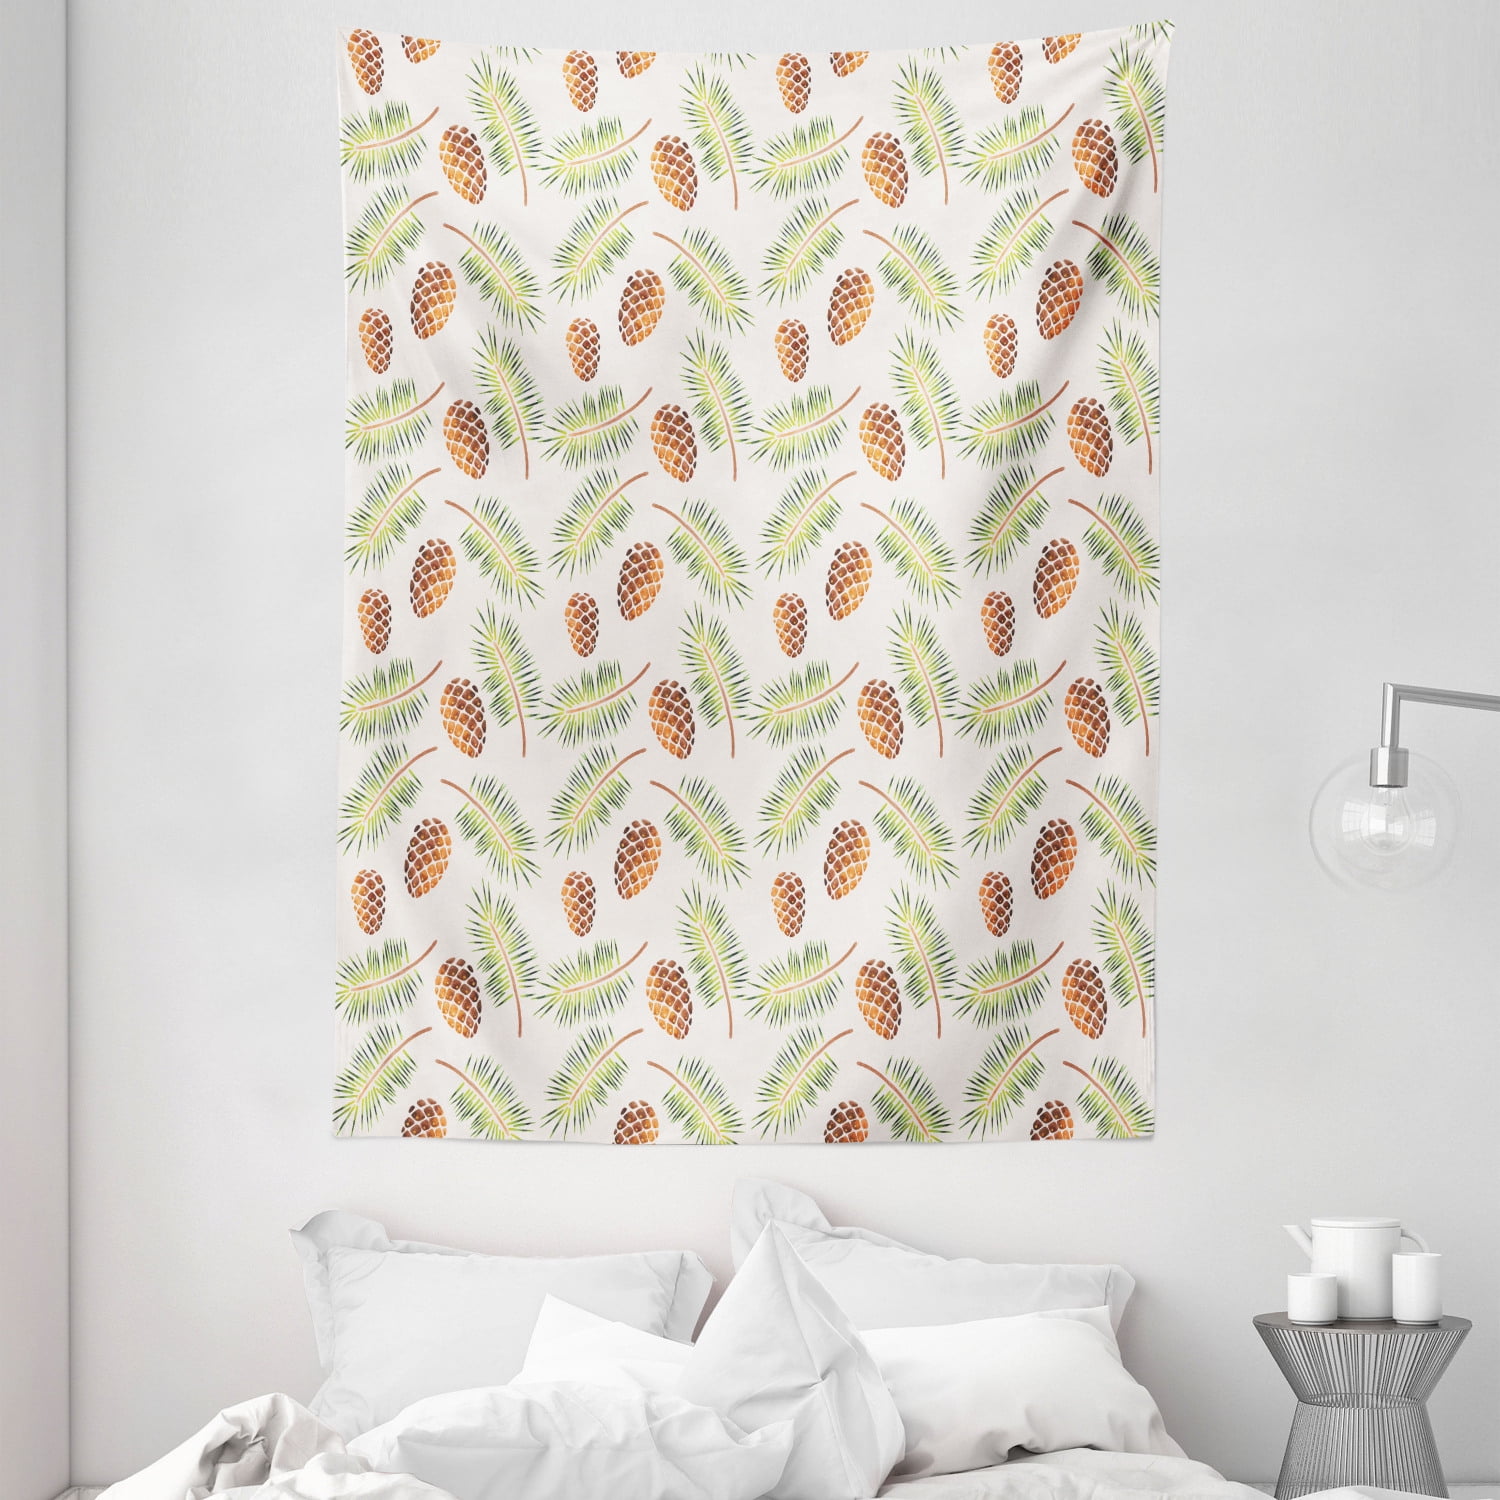 Fern Tapestry, Pine Branches Cones Woodland Tree Theme with Watercolor ...